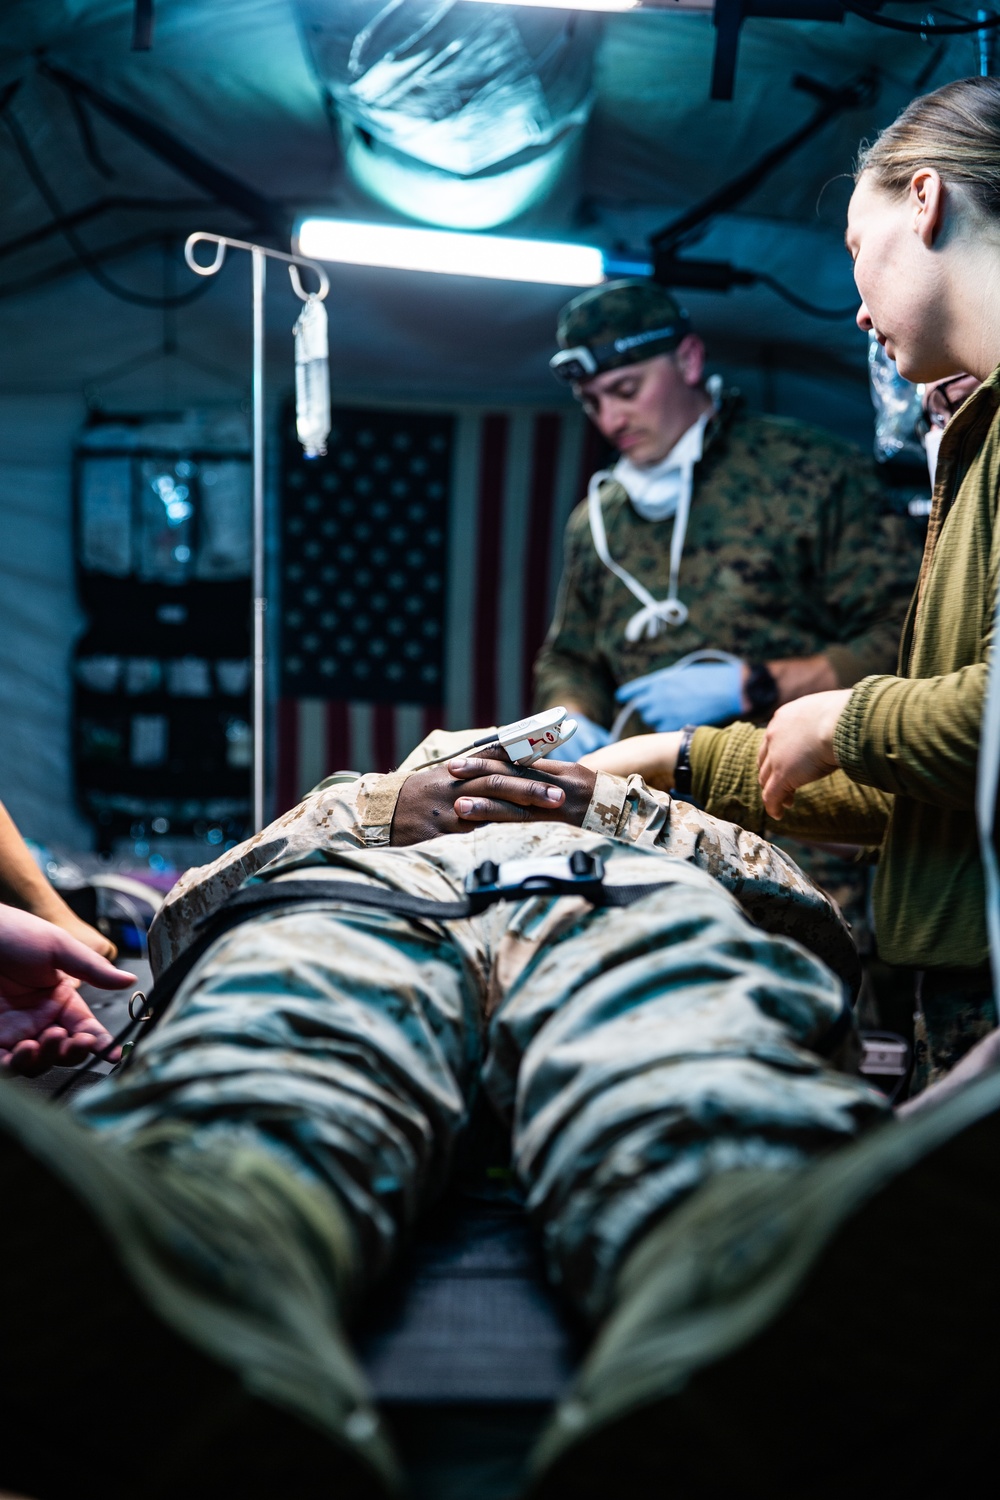 Train to save | U.S. Navy Sailors with 3rd Medical Battalion conduct training in a Role II medical facility during exercise Northern Viper